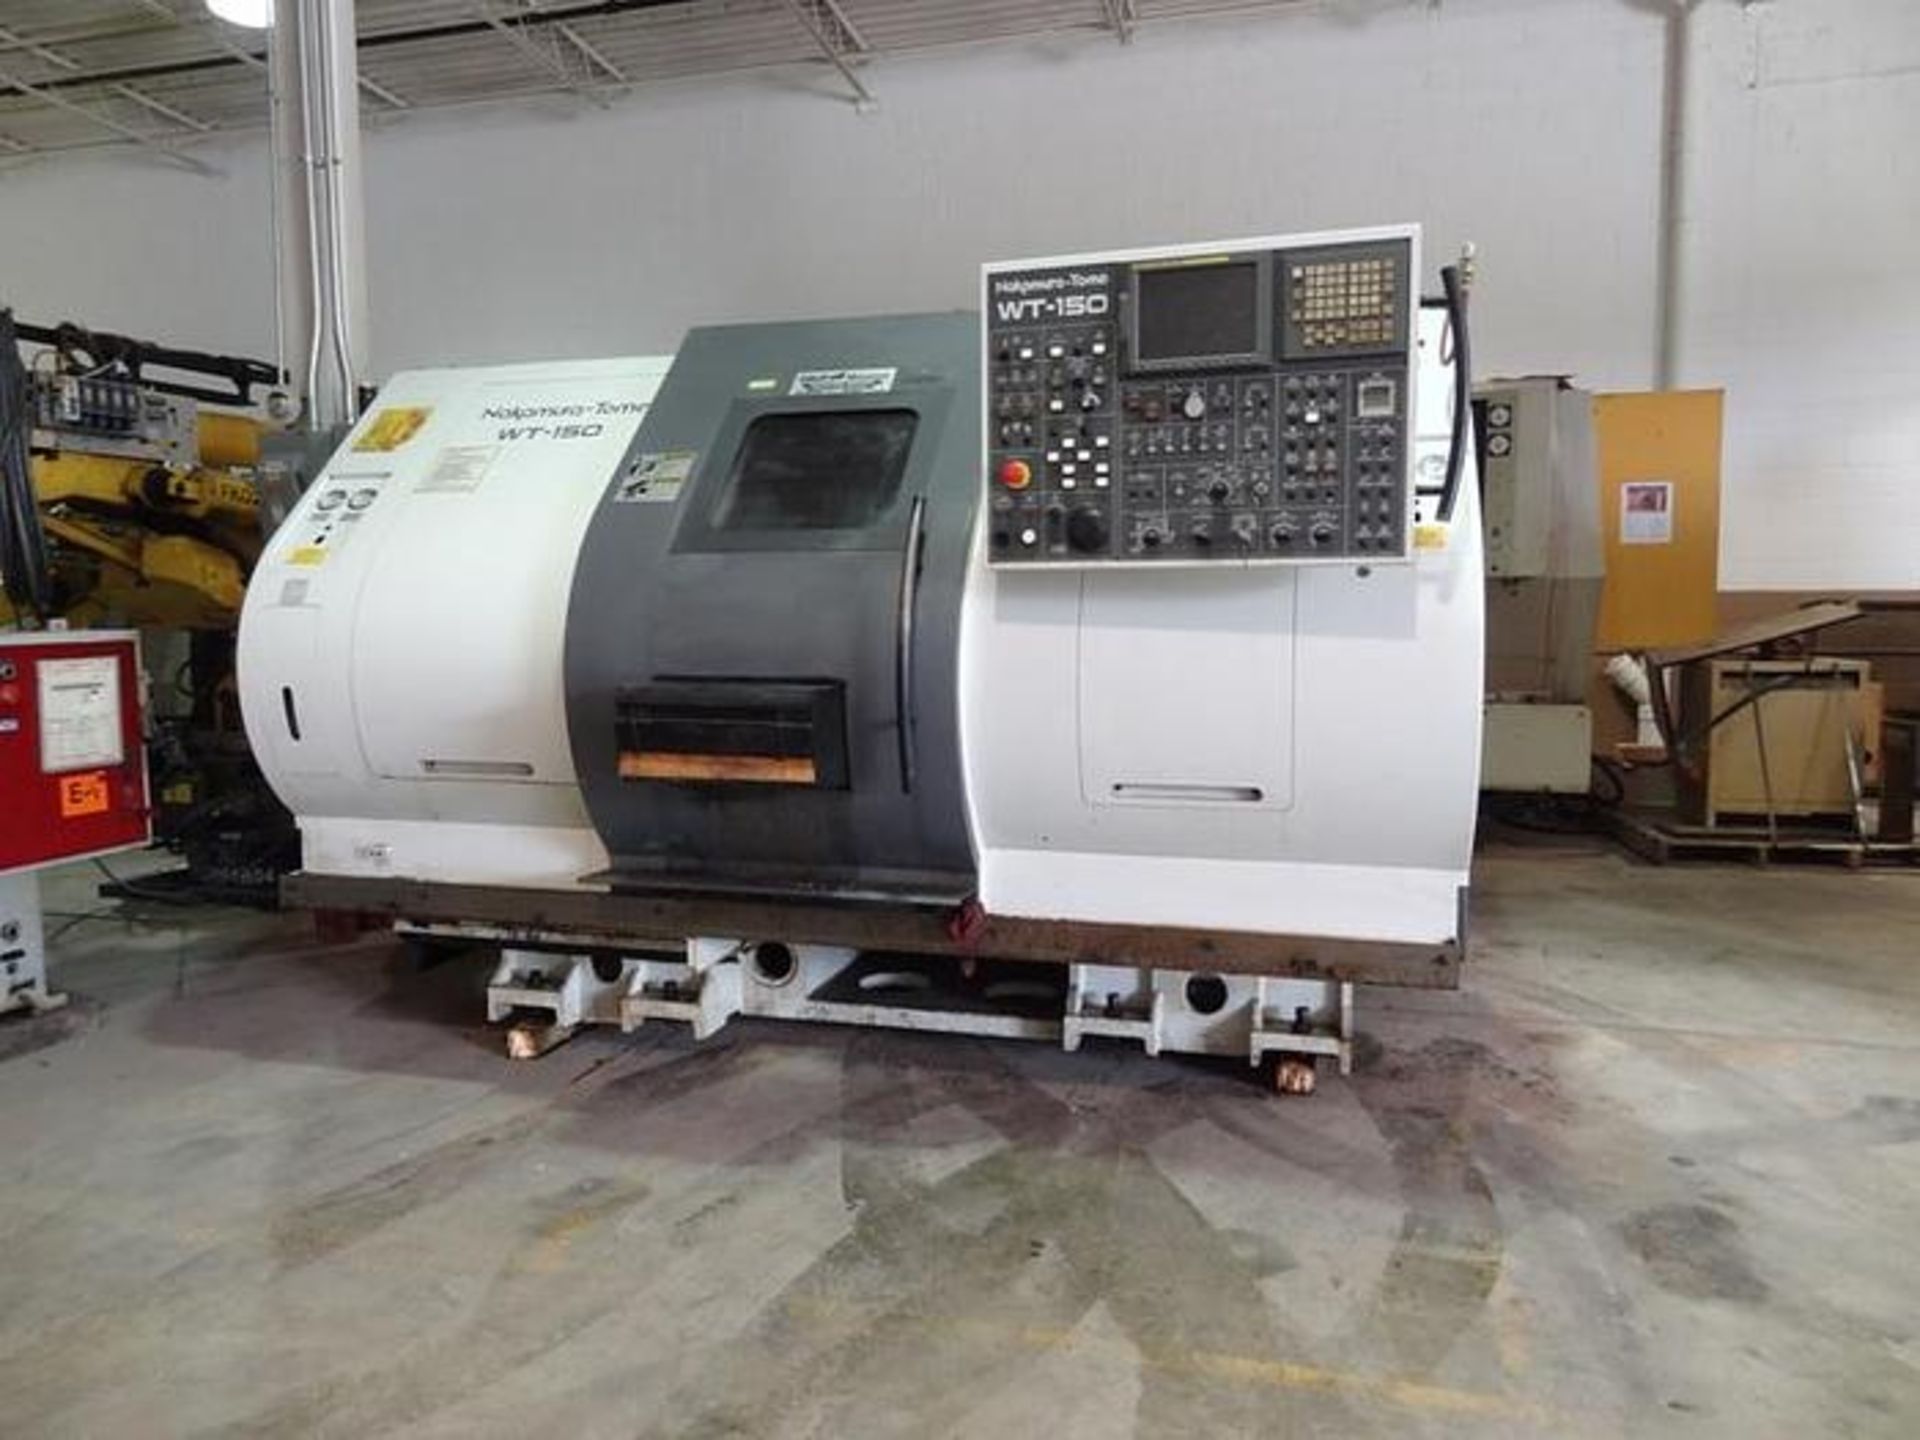 NAKAMURA TOME WT150MMY CNC 8 AXIS LATHE, YEAR 2005, SN M152808, LOCATION MI - Image 2 of 11